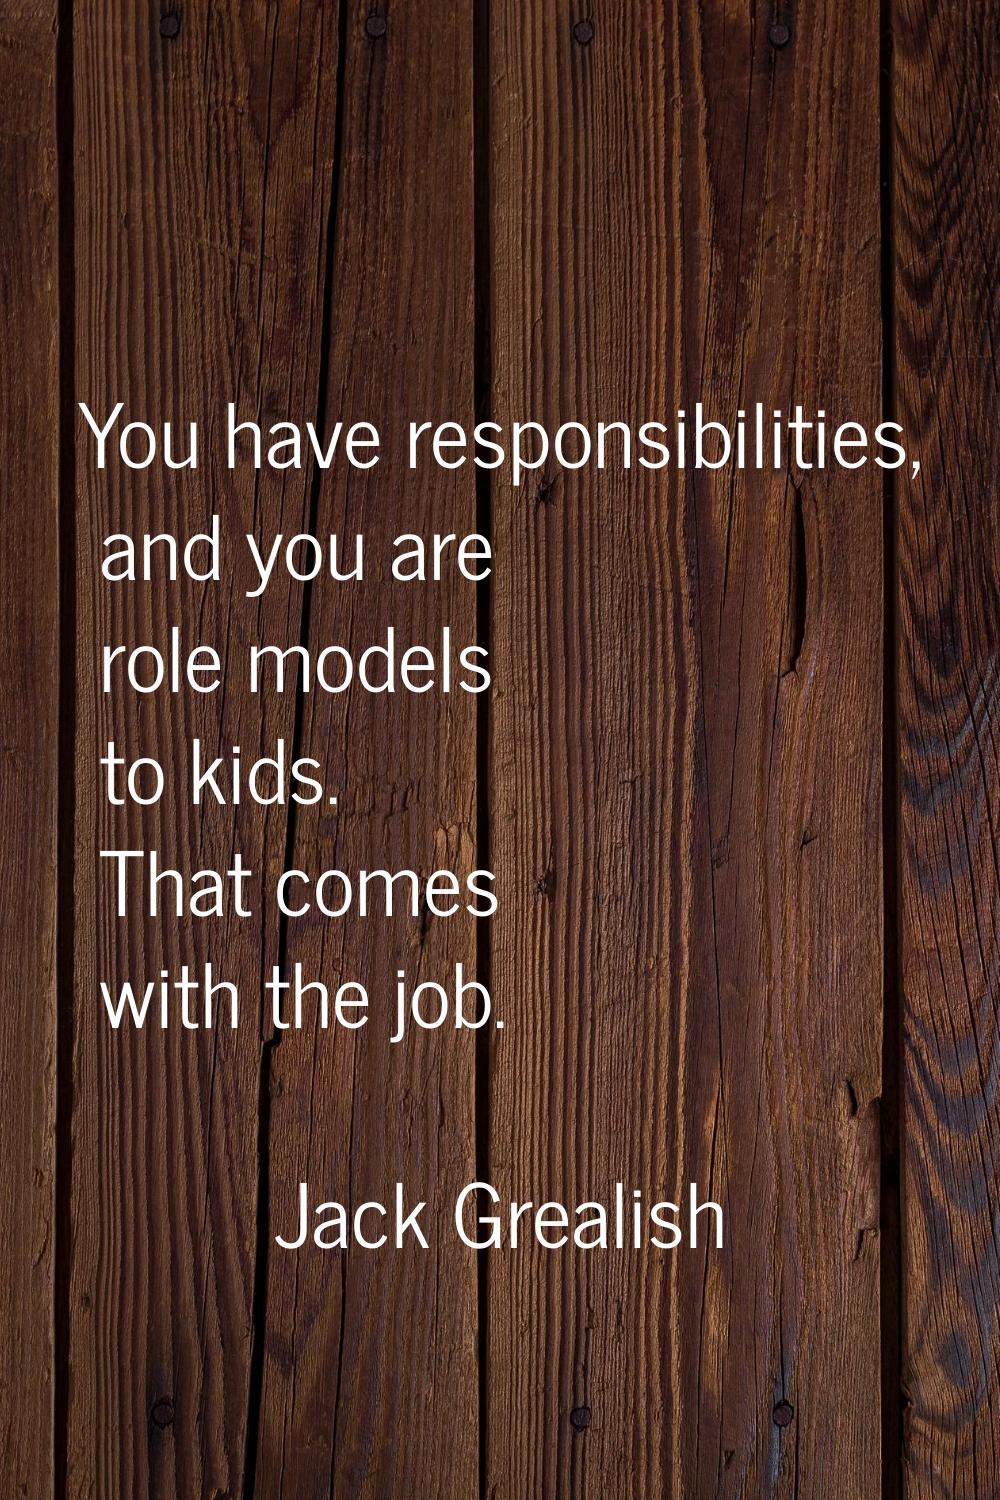 You have responsibilities, and you are role models to kids. That comes with the job.